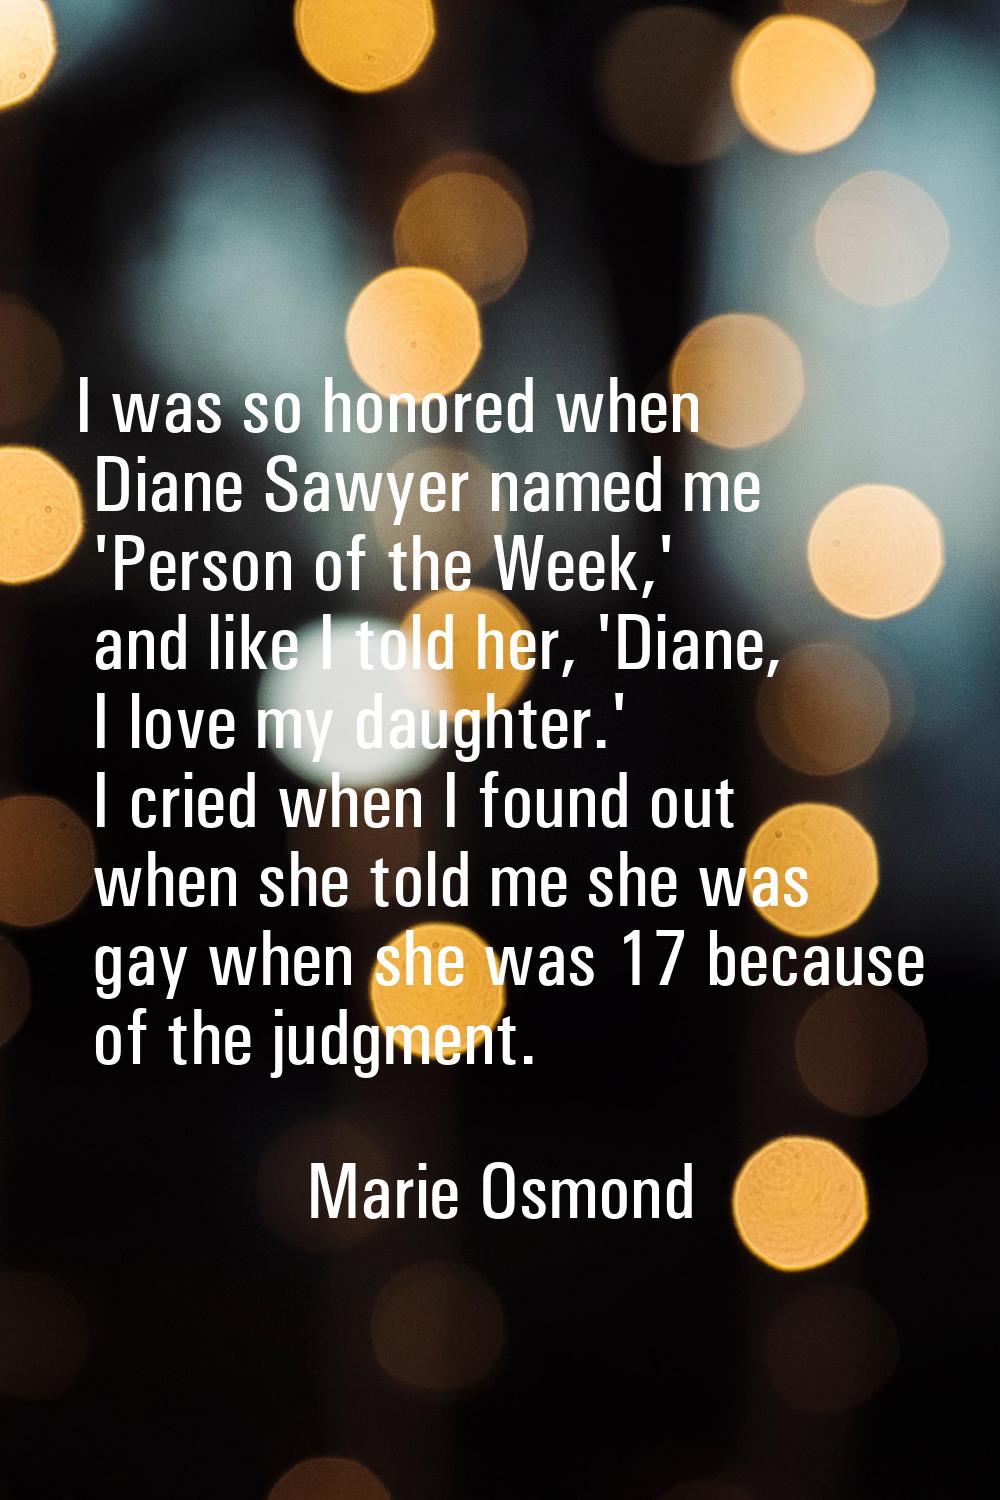 I was so honored when Diane Sawyer named me 'Person of the Week,' and like I told her, 'Diane, I lo